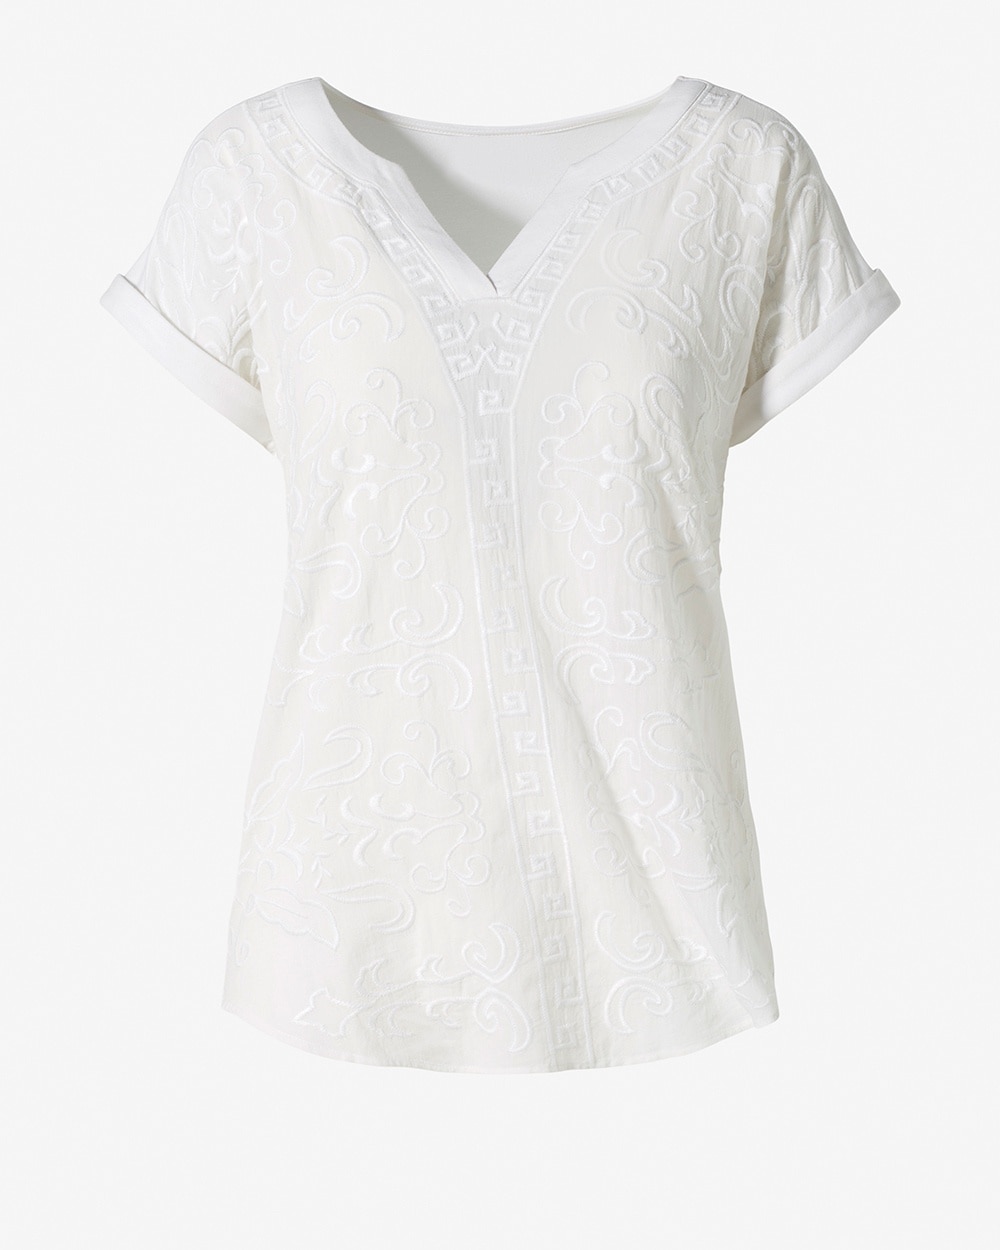 Embroidered Popover Top